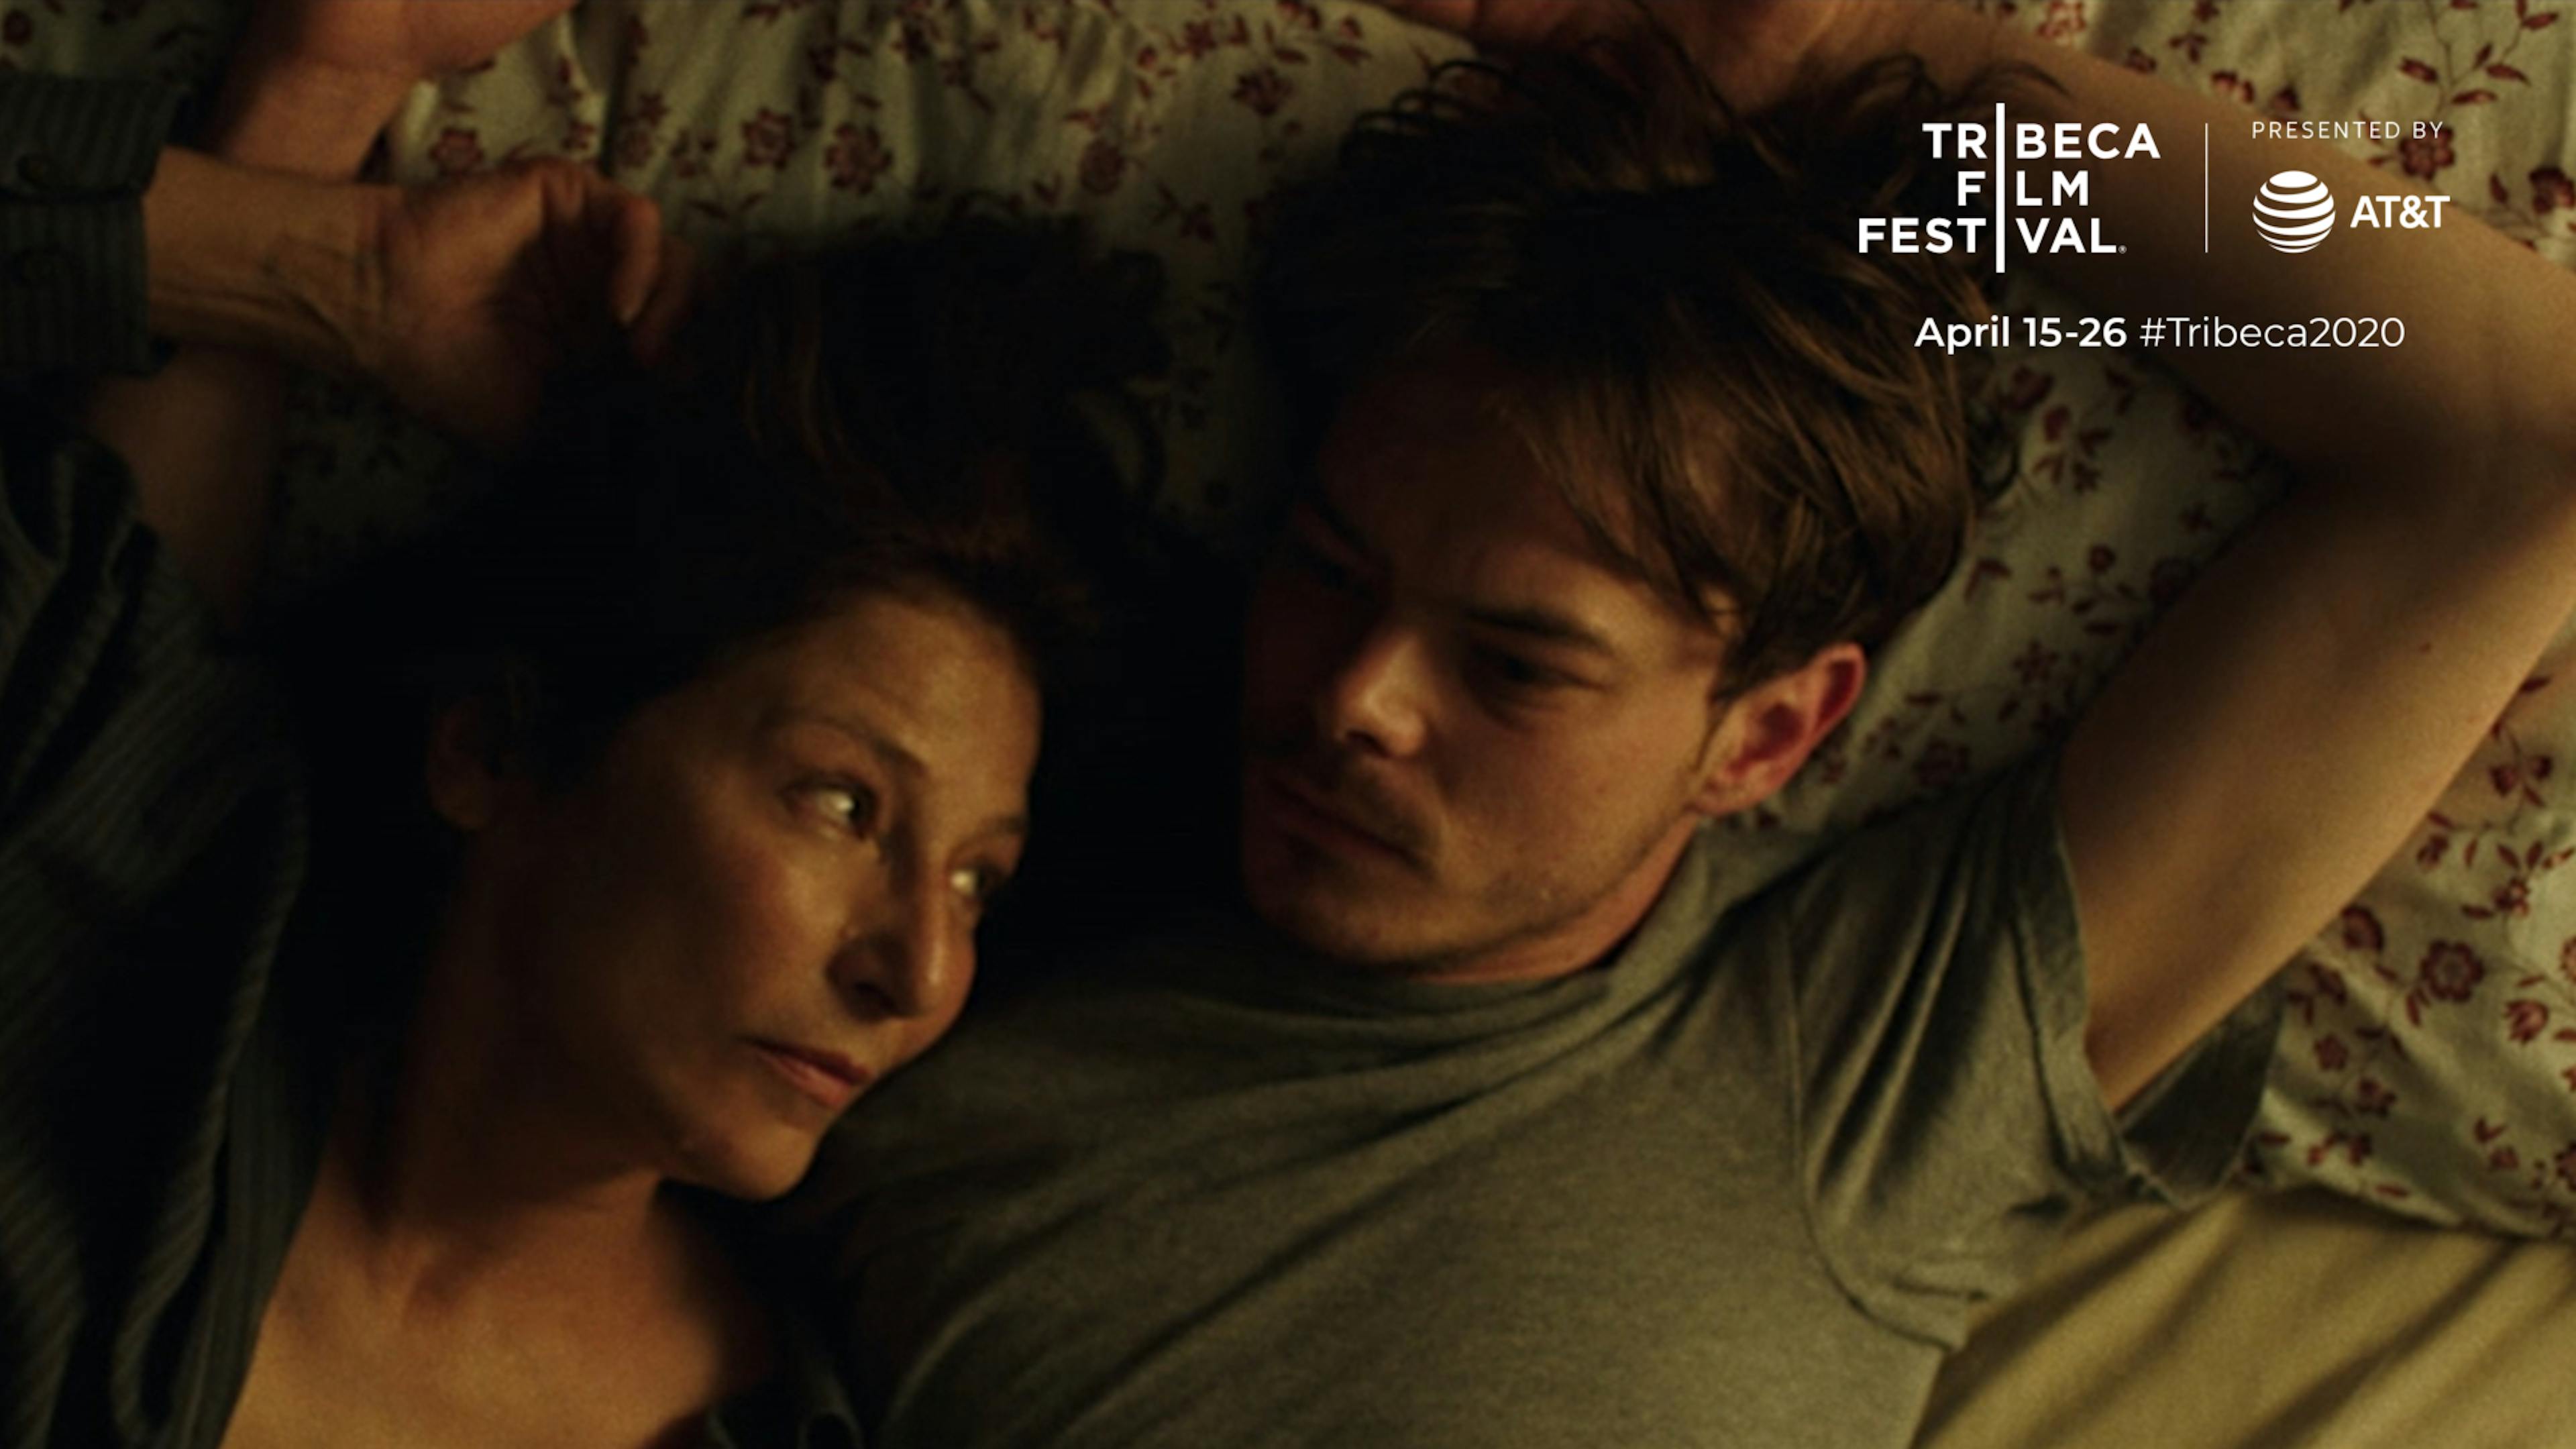 A man with an older woman lay on a bed together. Tribeca Film Festival 2020 text is shown in the upper right